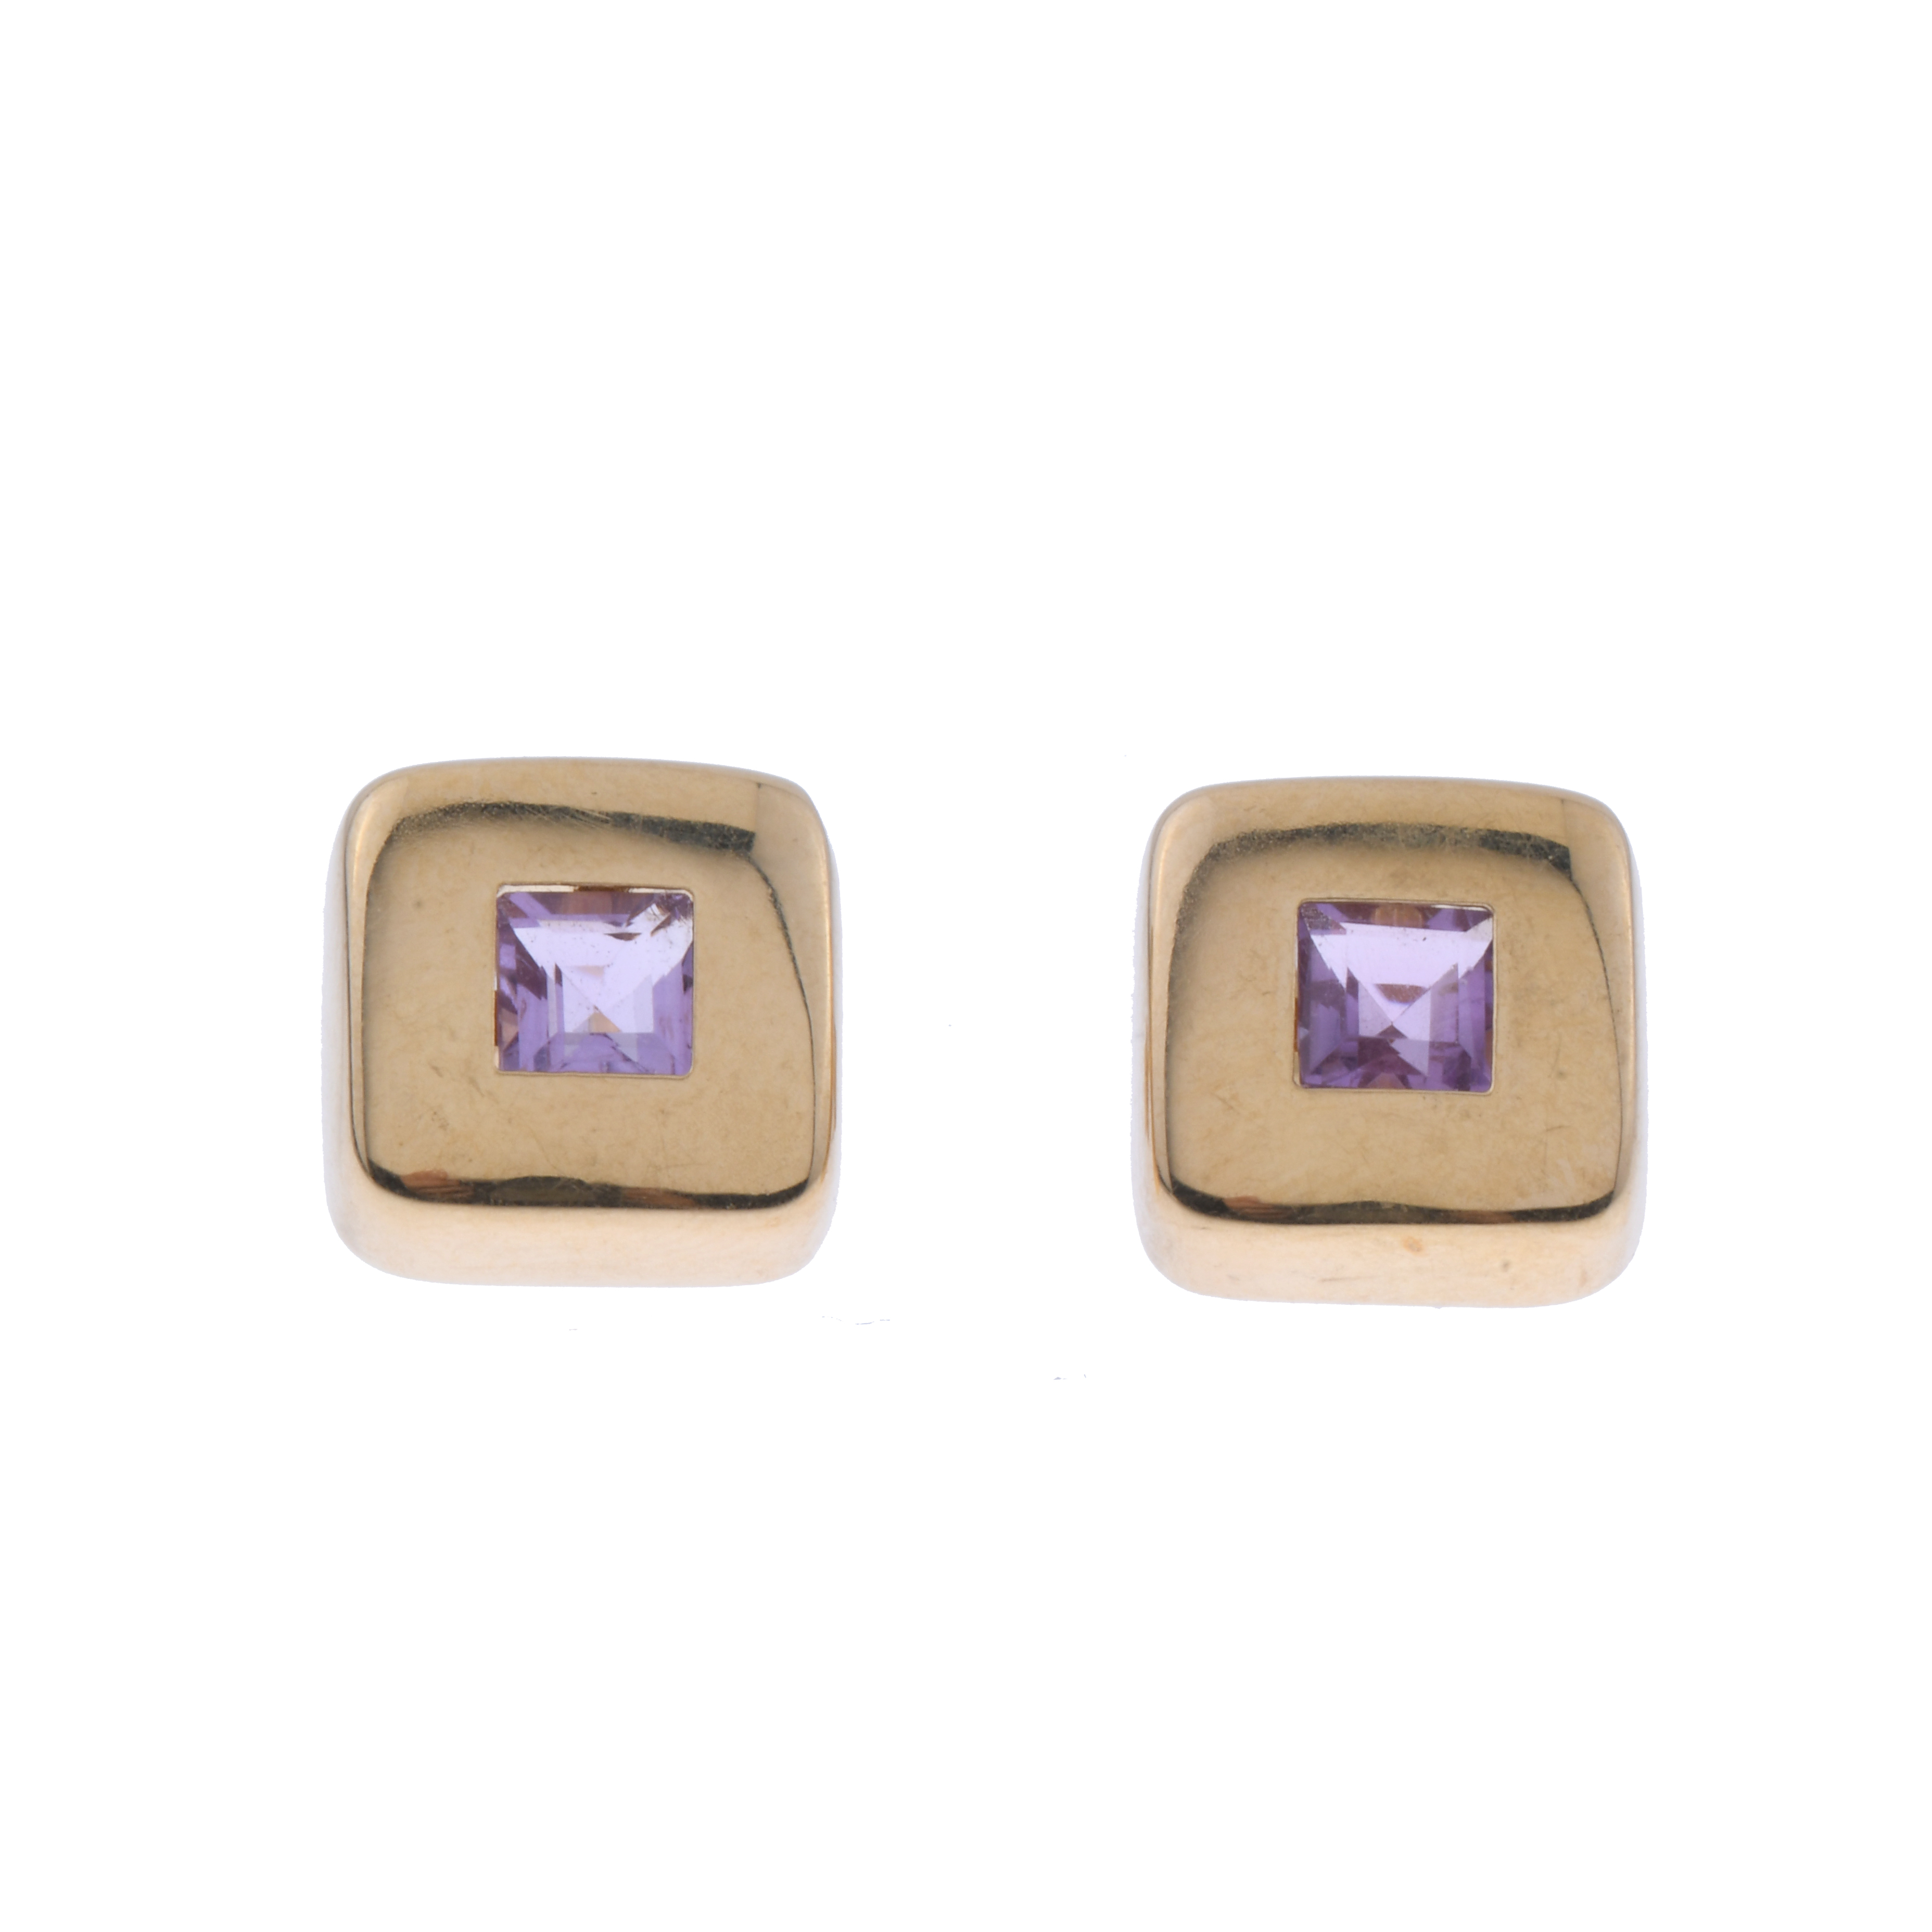 SQUARE EARRINGS WITH AMETHYST.